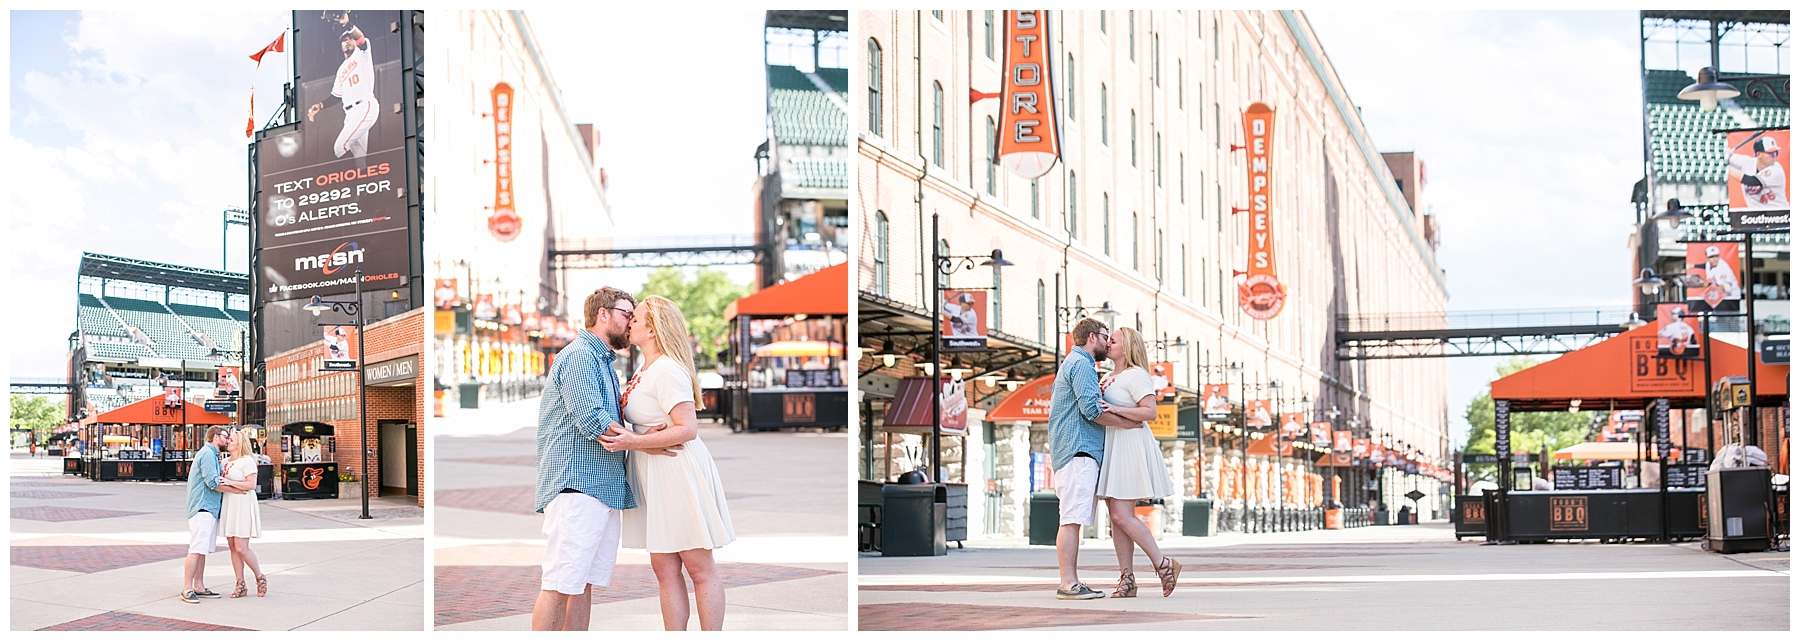 Tess Ray Camden Yards Engagement Session Living Radiant Photography photos_0034.jpg